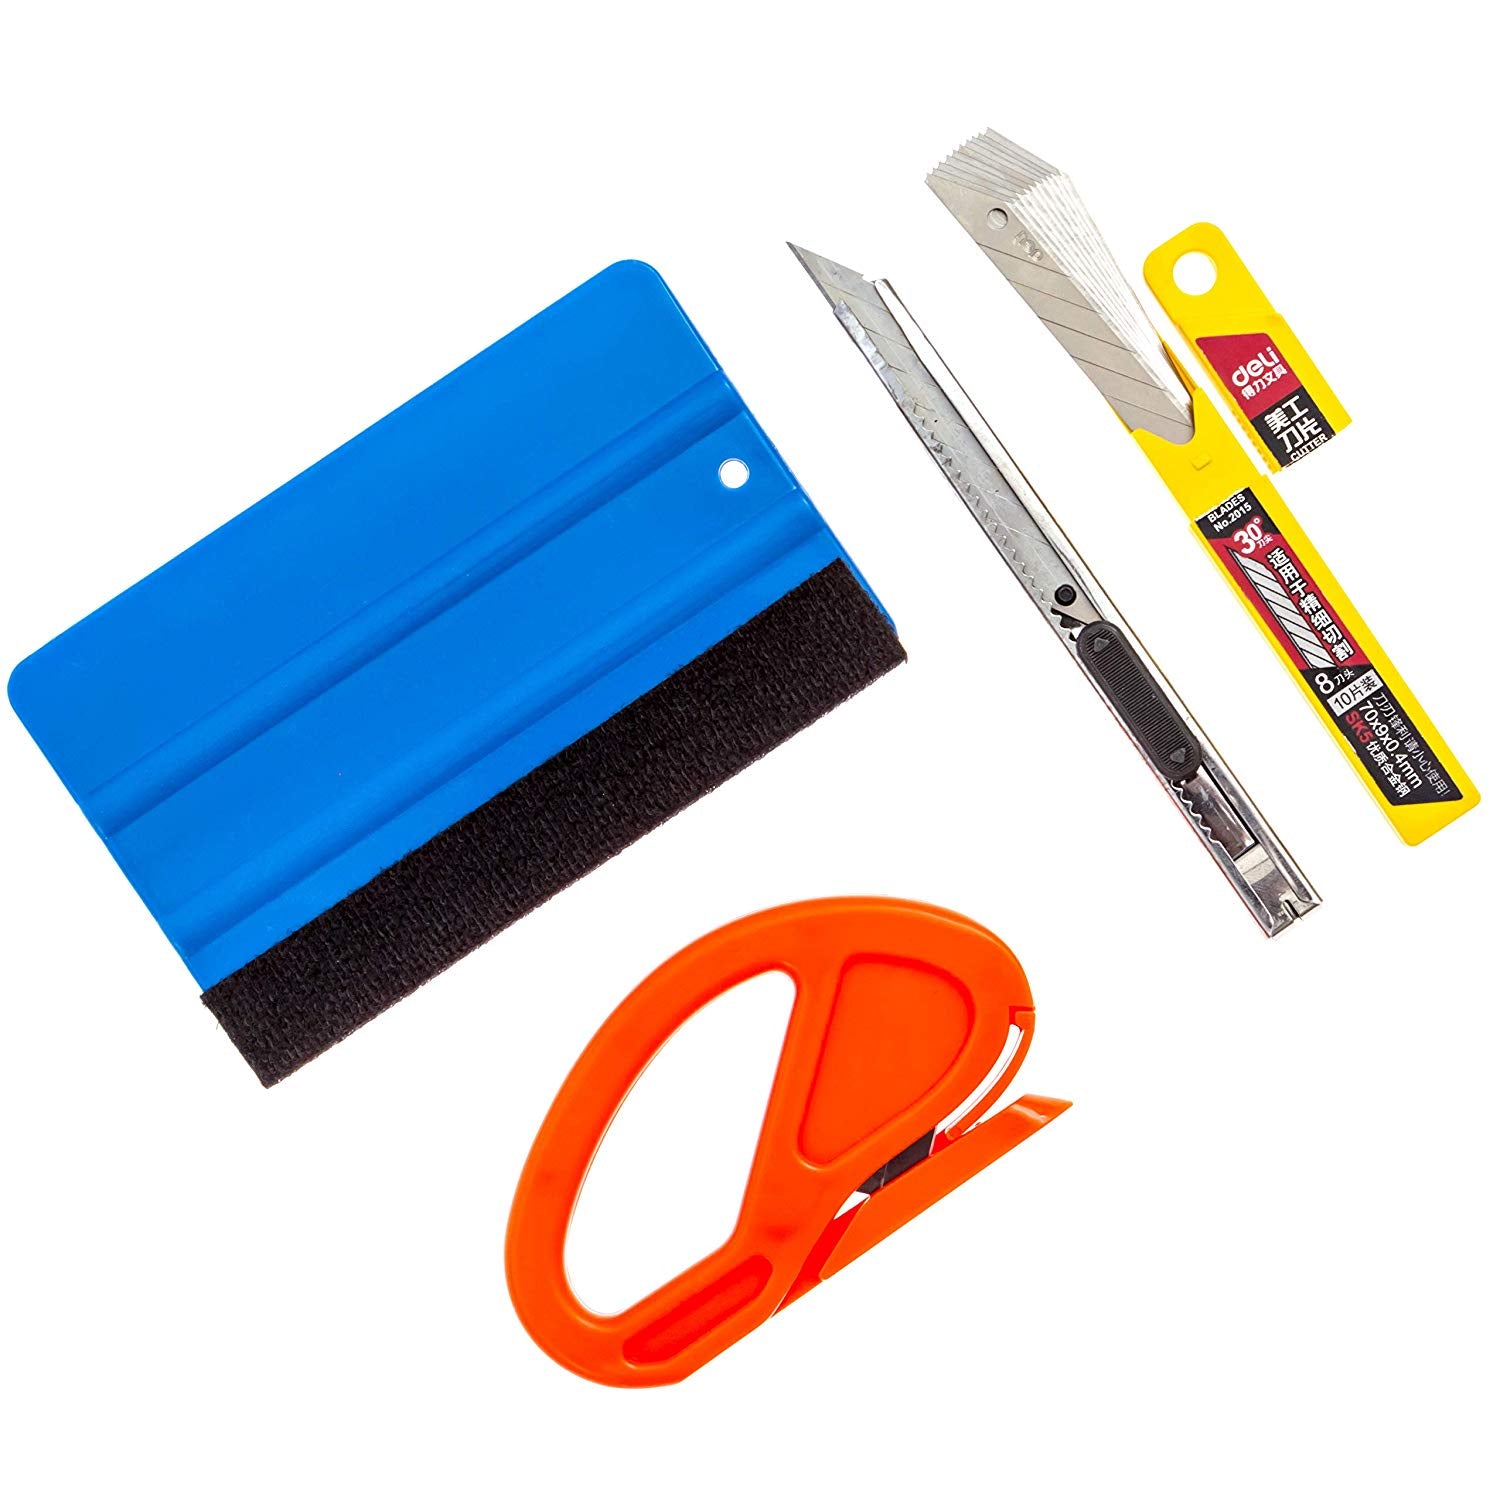 Vinyl Wrapping Accessory Kit